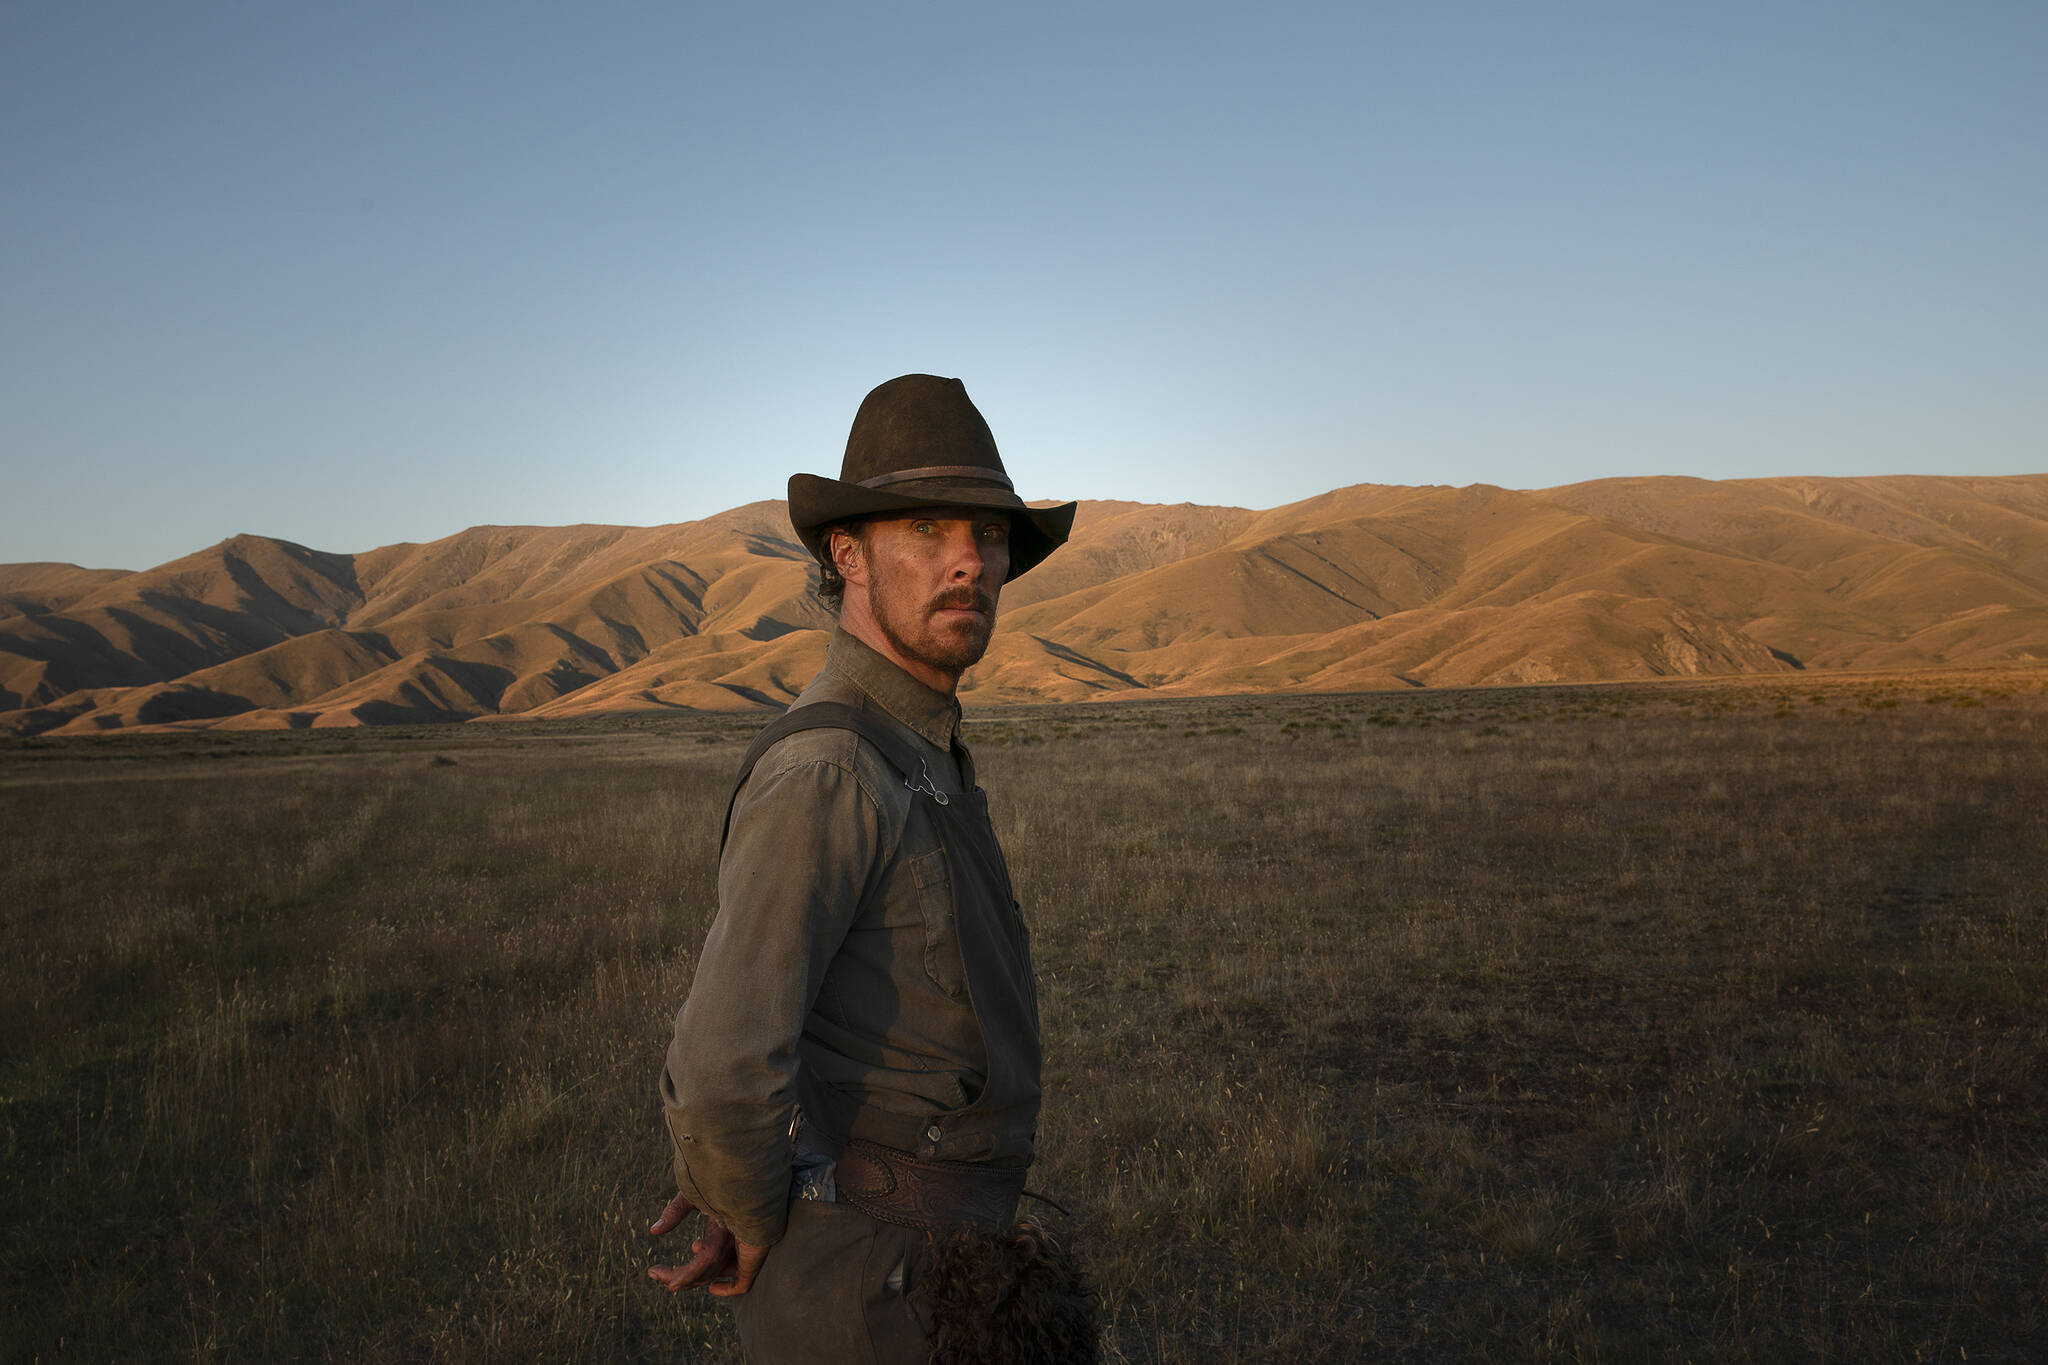 <p>Benedict Cumberbatch plays the film’s central character, Phil Burbank, a deeply conflicted cowboy running a cattle ranch with his brother in 1920s Montana. (Kirsty Griffin / Netflix)</p>